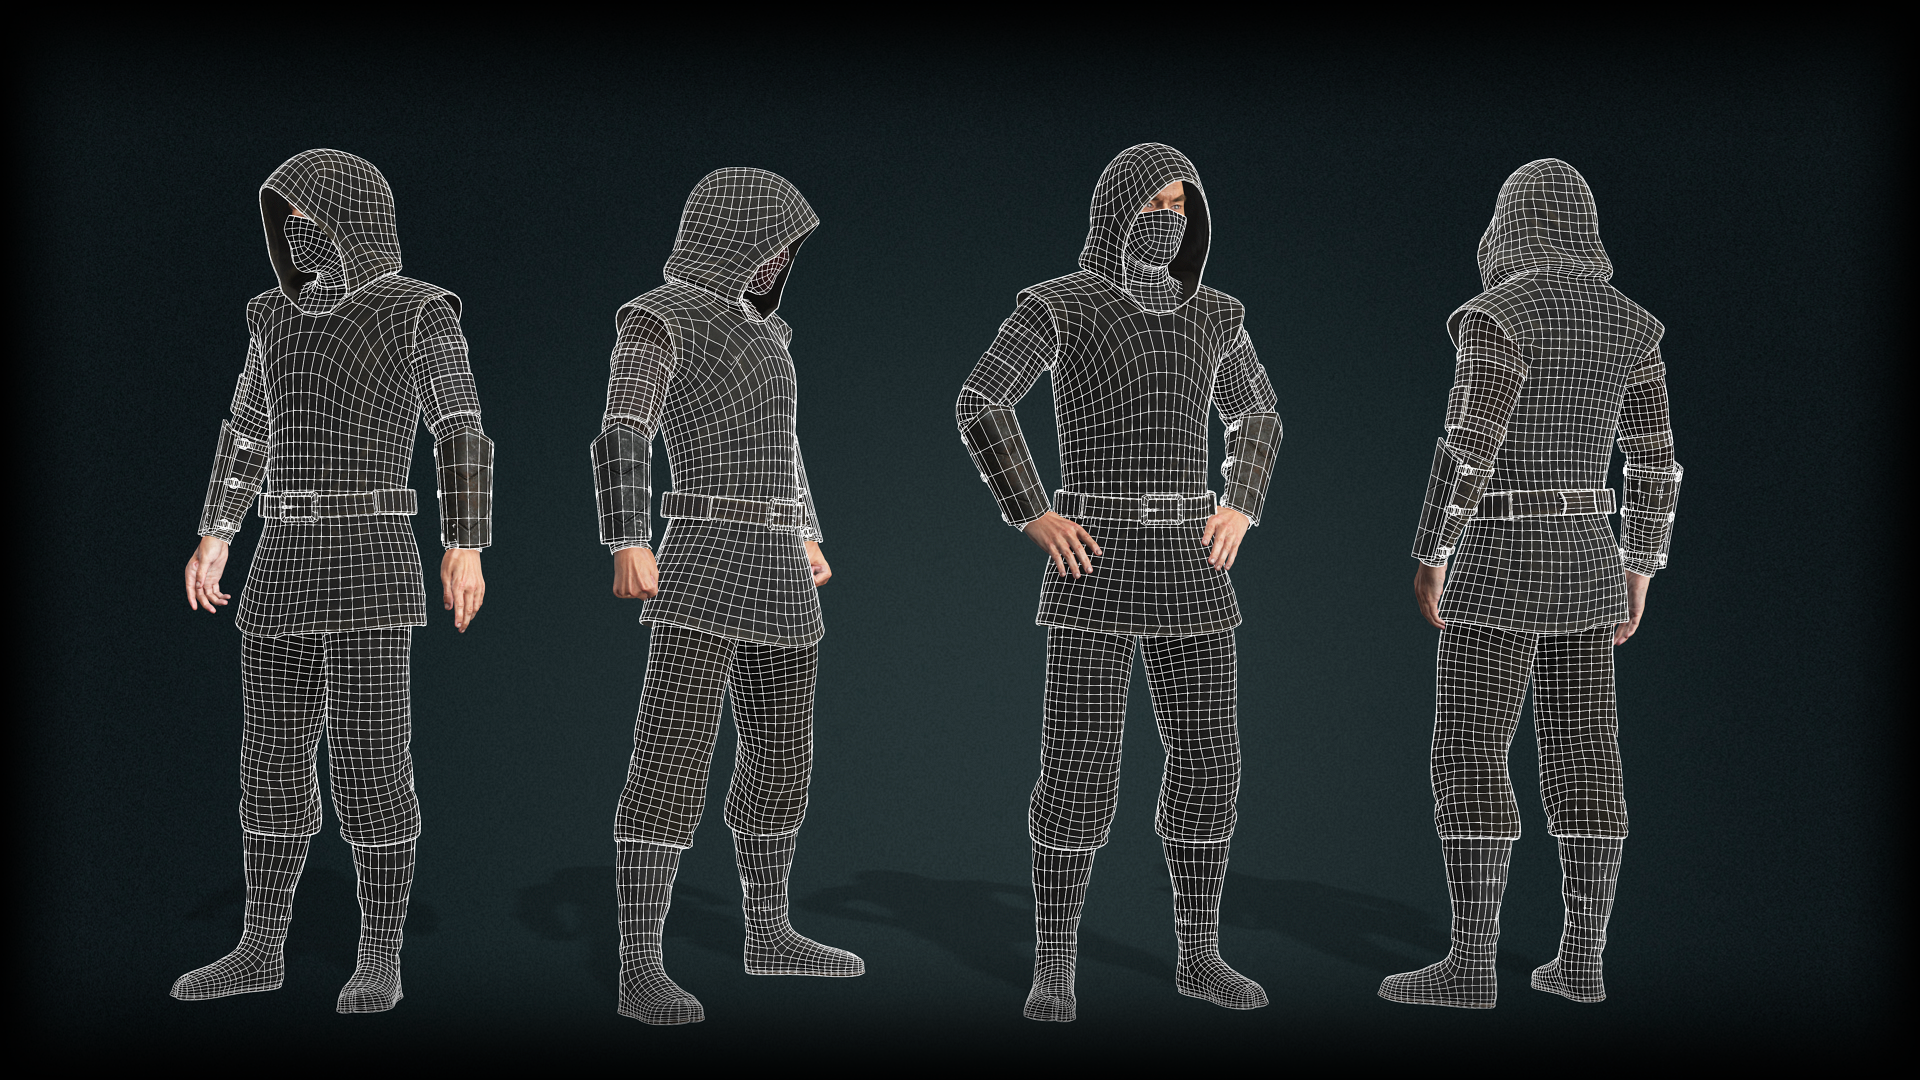 Fantasy Assassin - Male - Character Creator/Outfit - Reallusion